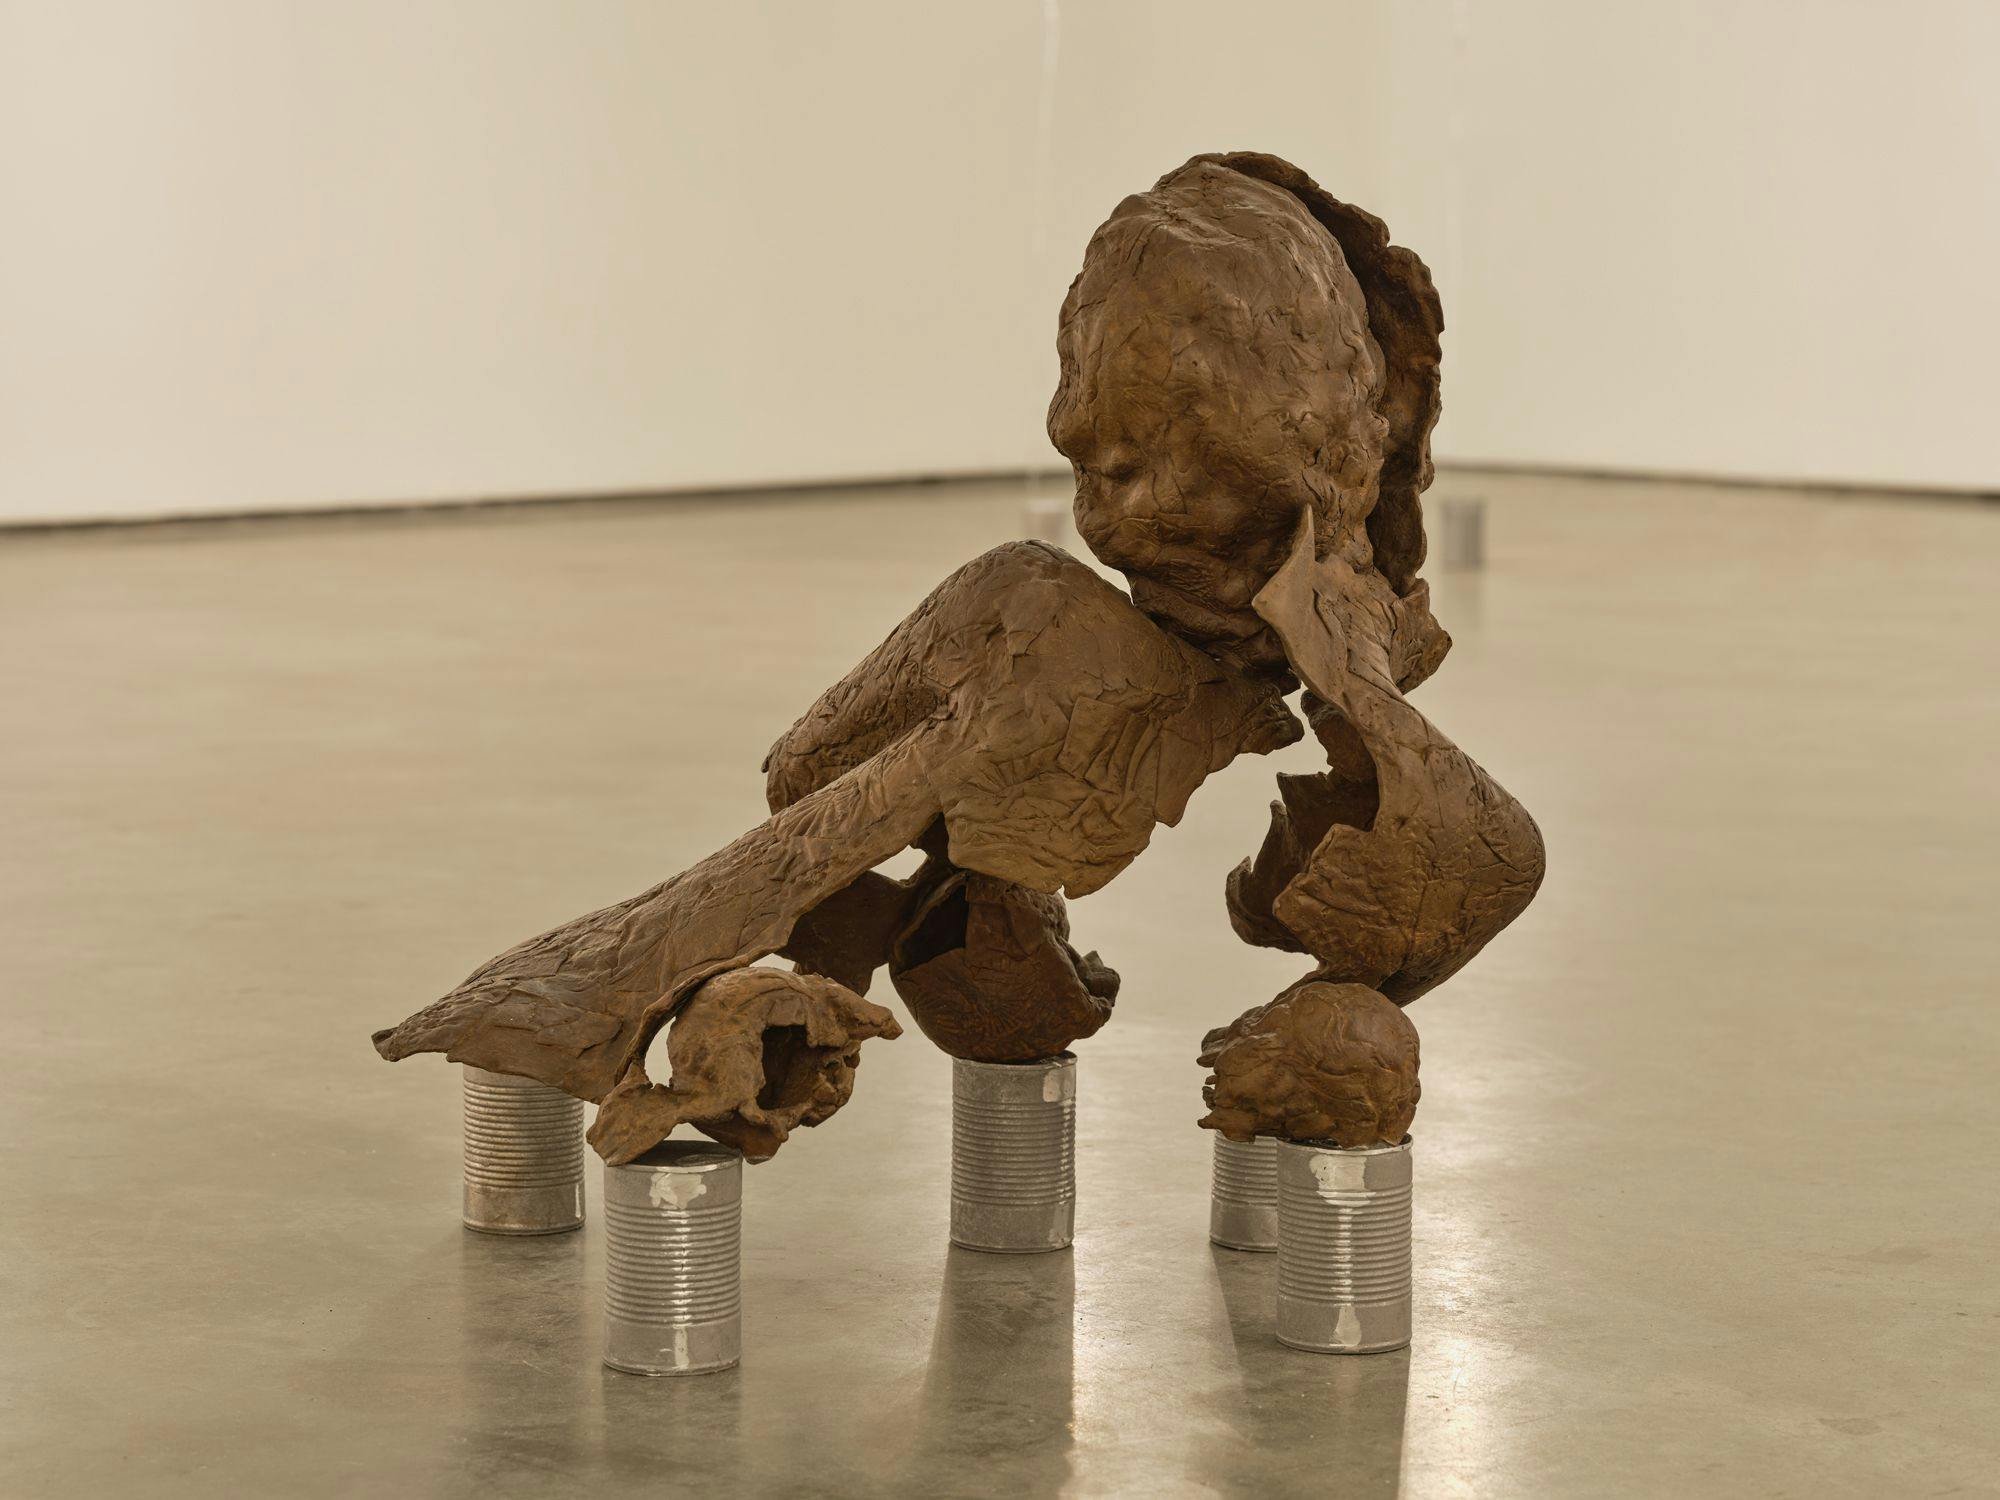 A bronze sculpture of a partial human figure sits on aluminum cans on a concrete floor. The sculpture appears to be disintegrating.